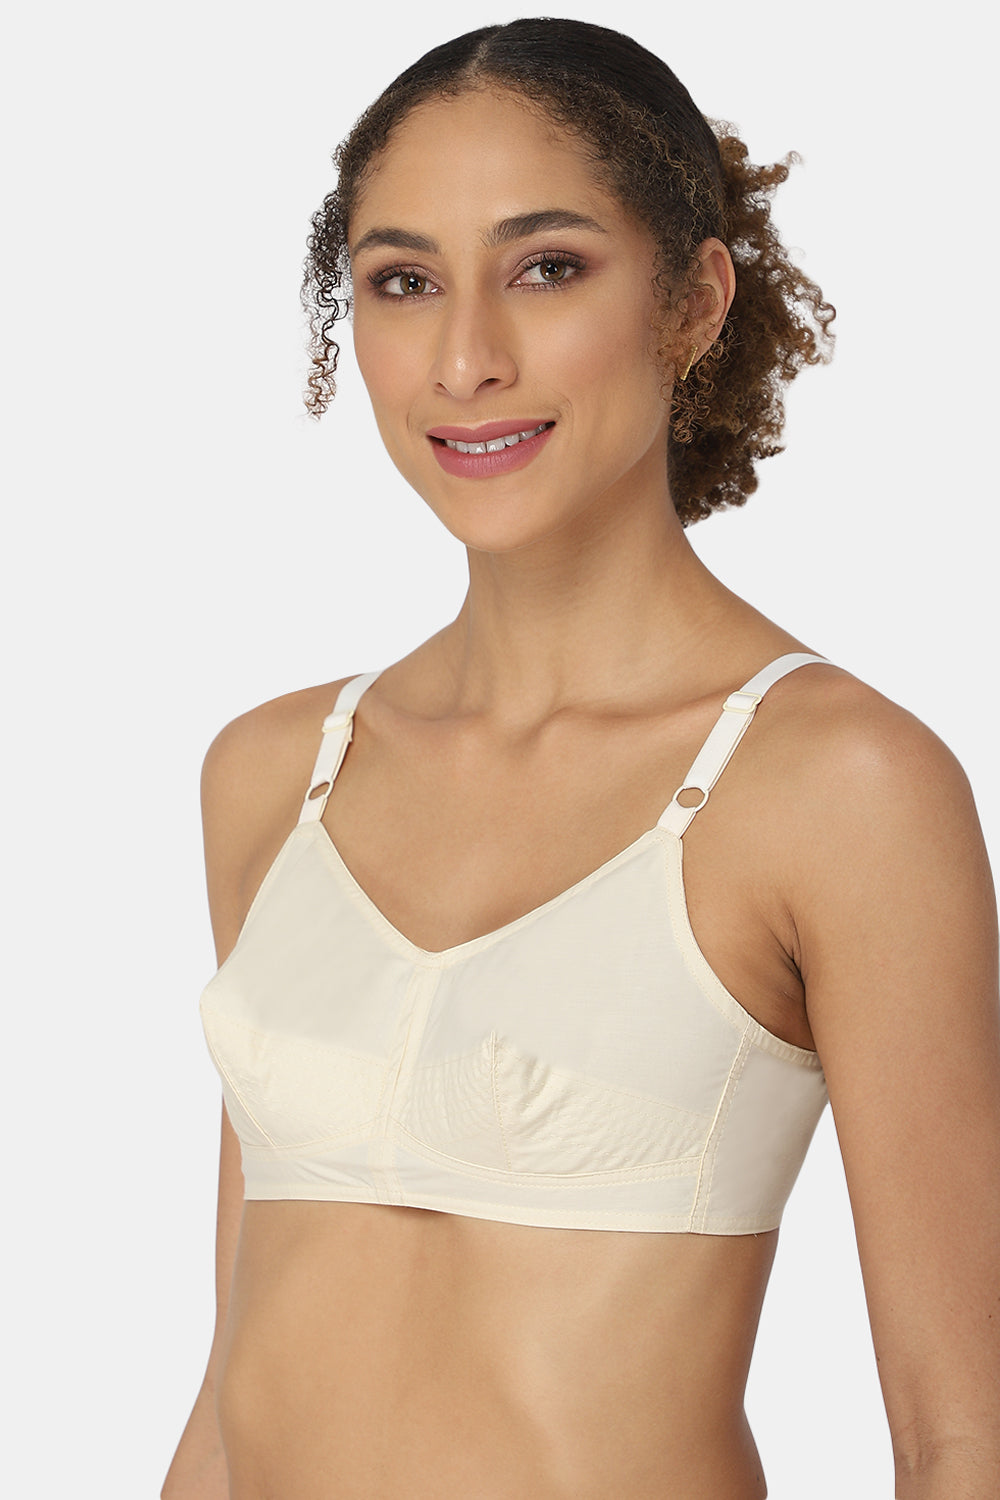 Buy Naidu Hall Women's Cotton Brassiere Non-Padded Non-Wired